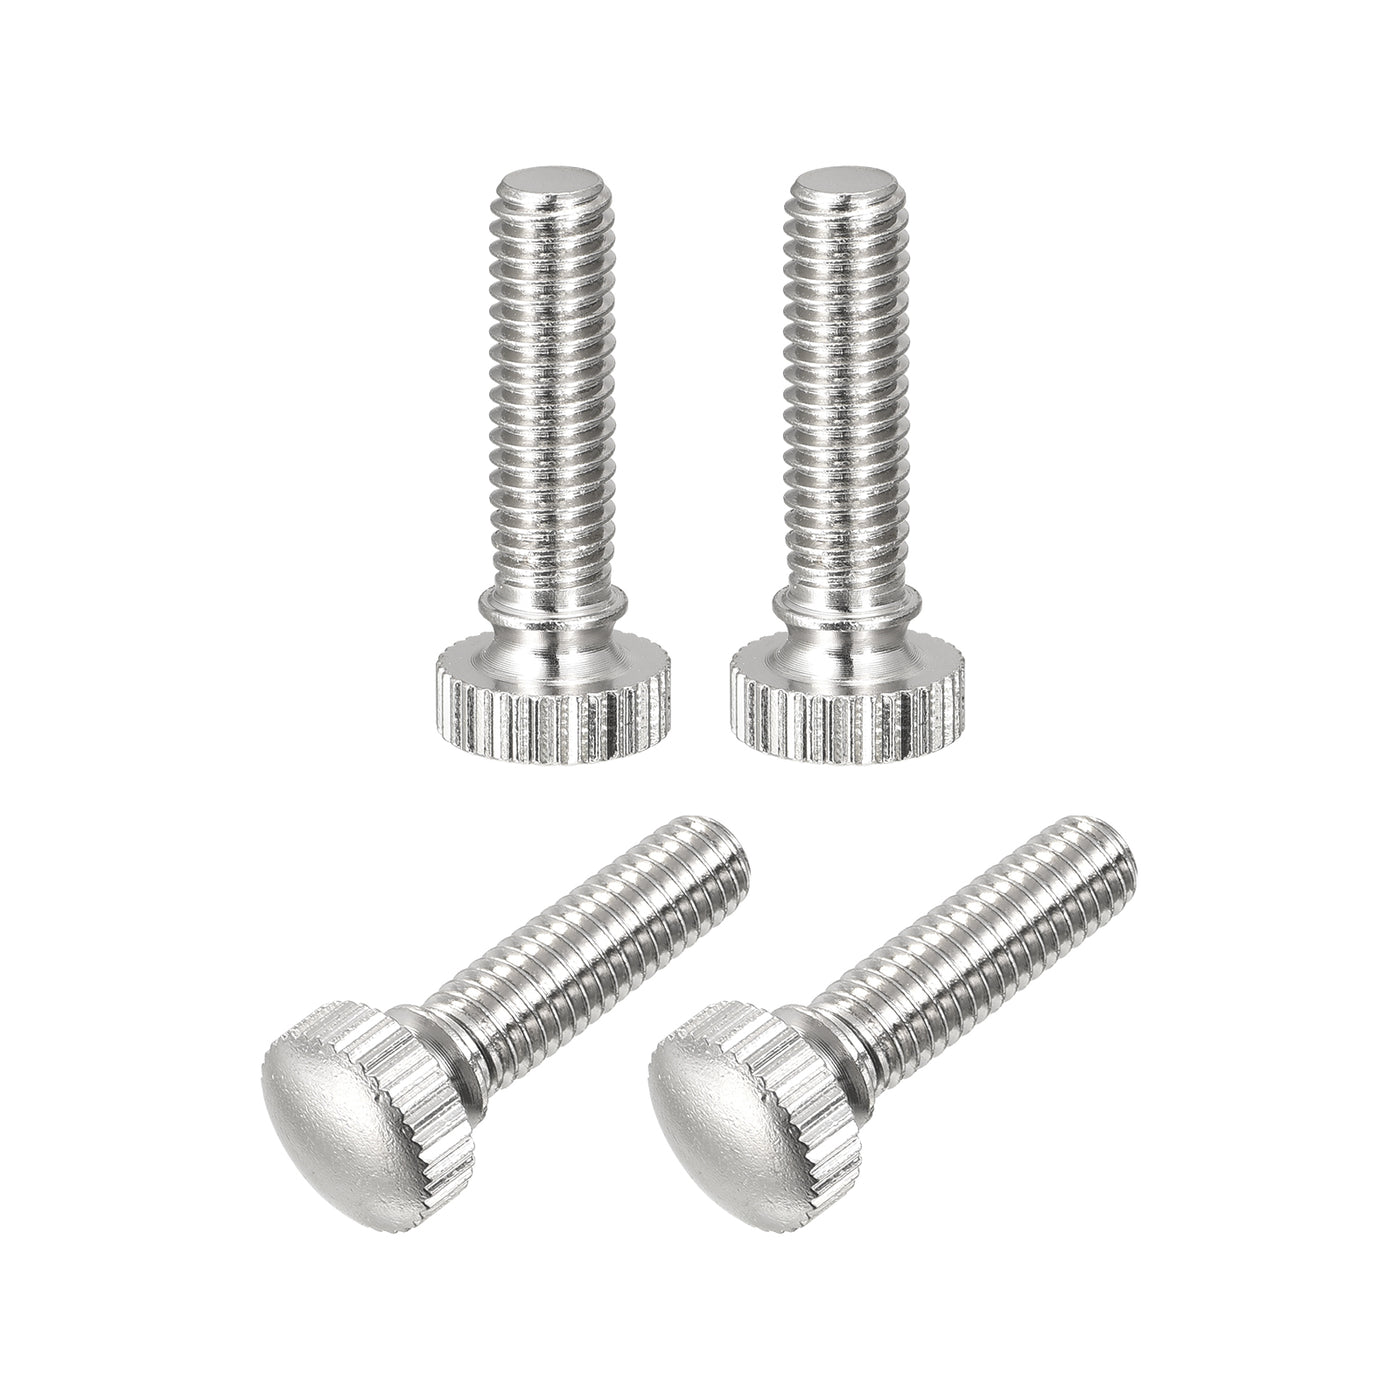 uxcell Uxcell Knurled Thumb Screws, M6x20mm Brass Shoulder Bolts Grip Knobs Fasteners, Nickel Plated 4Pcs